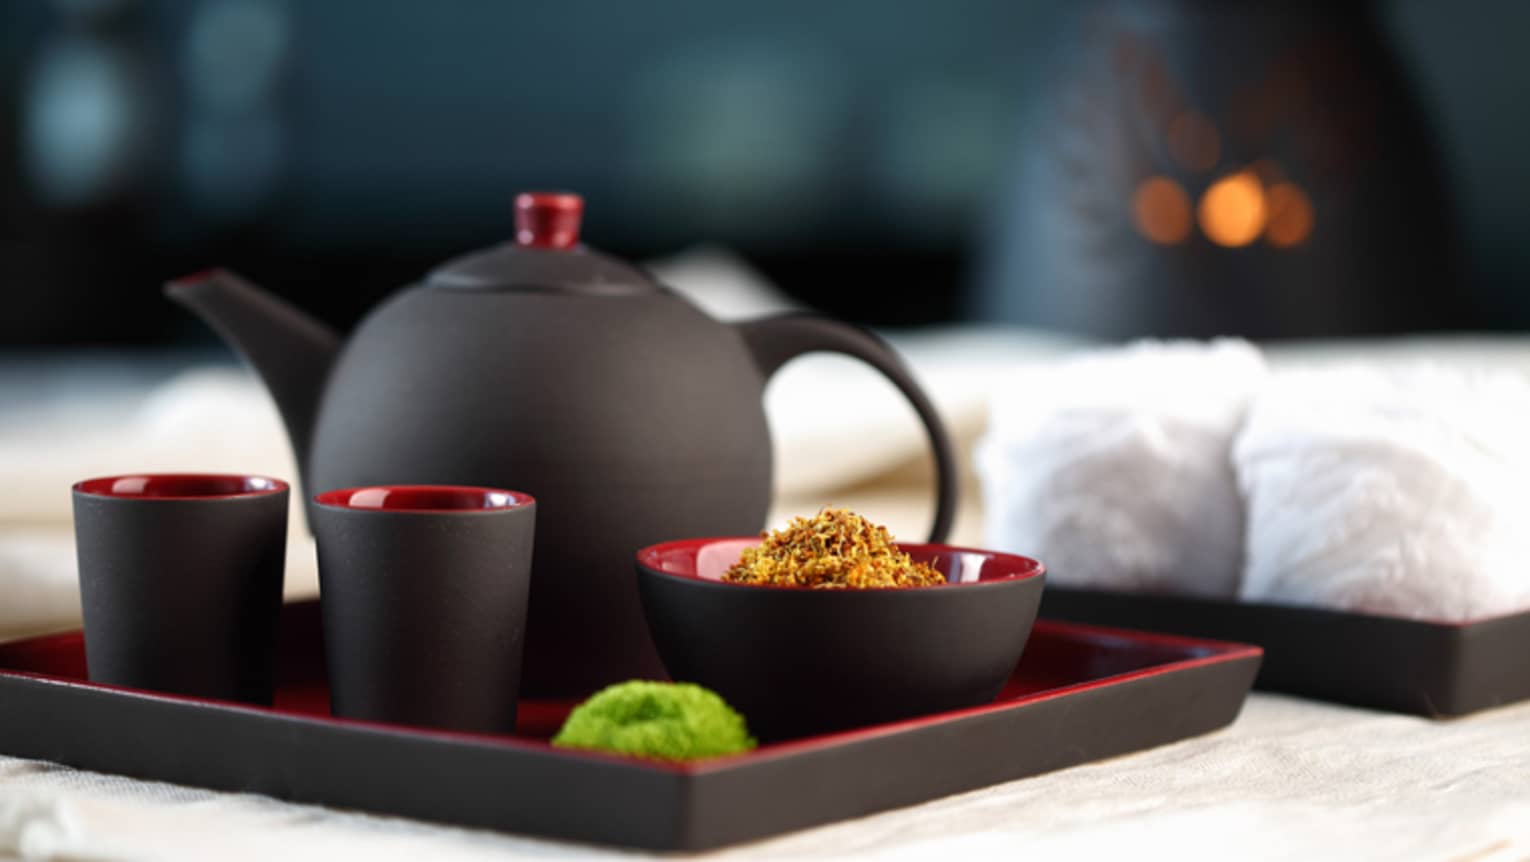 Black-and-red modern teapot with two mugs and bowl of loose-leaf chamomile on serving tray